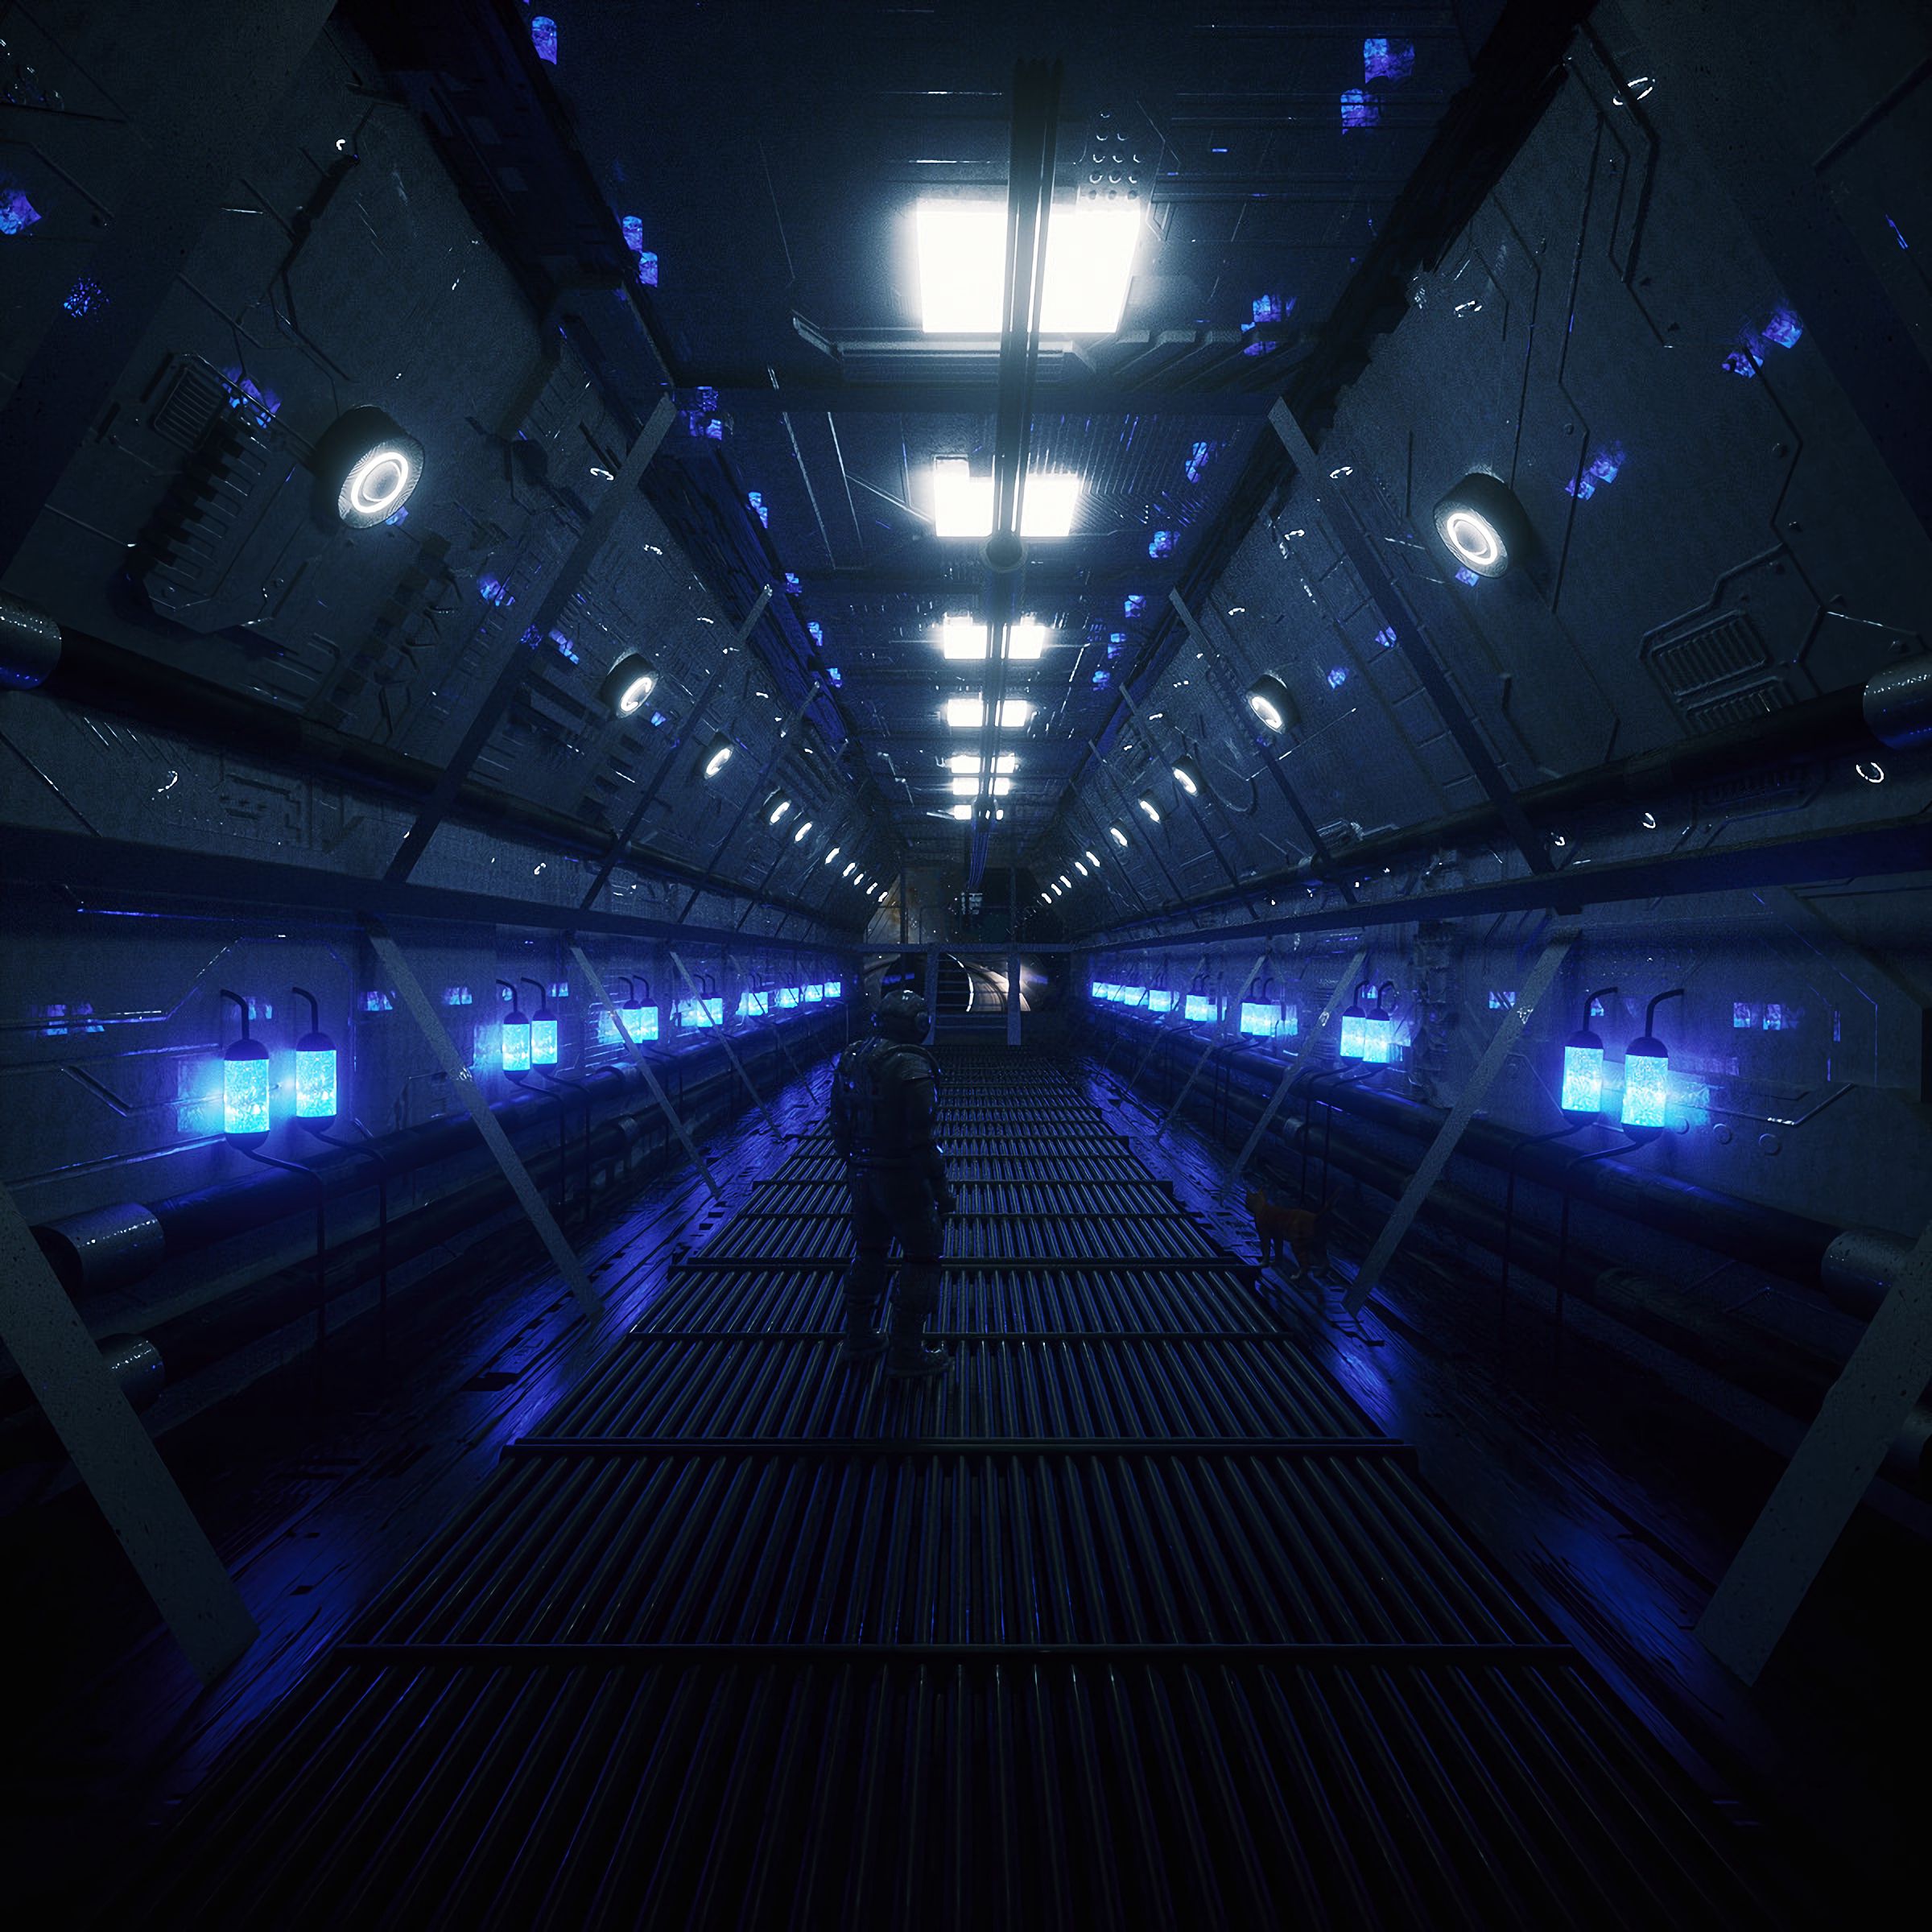 spaceship, backlight, art, illumination, human, person, station, space suit, spacesuit, render